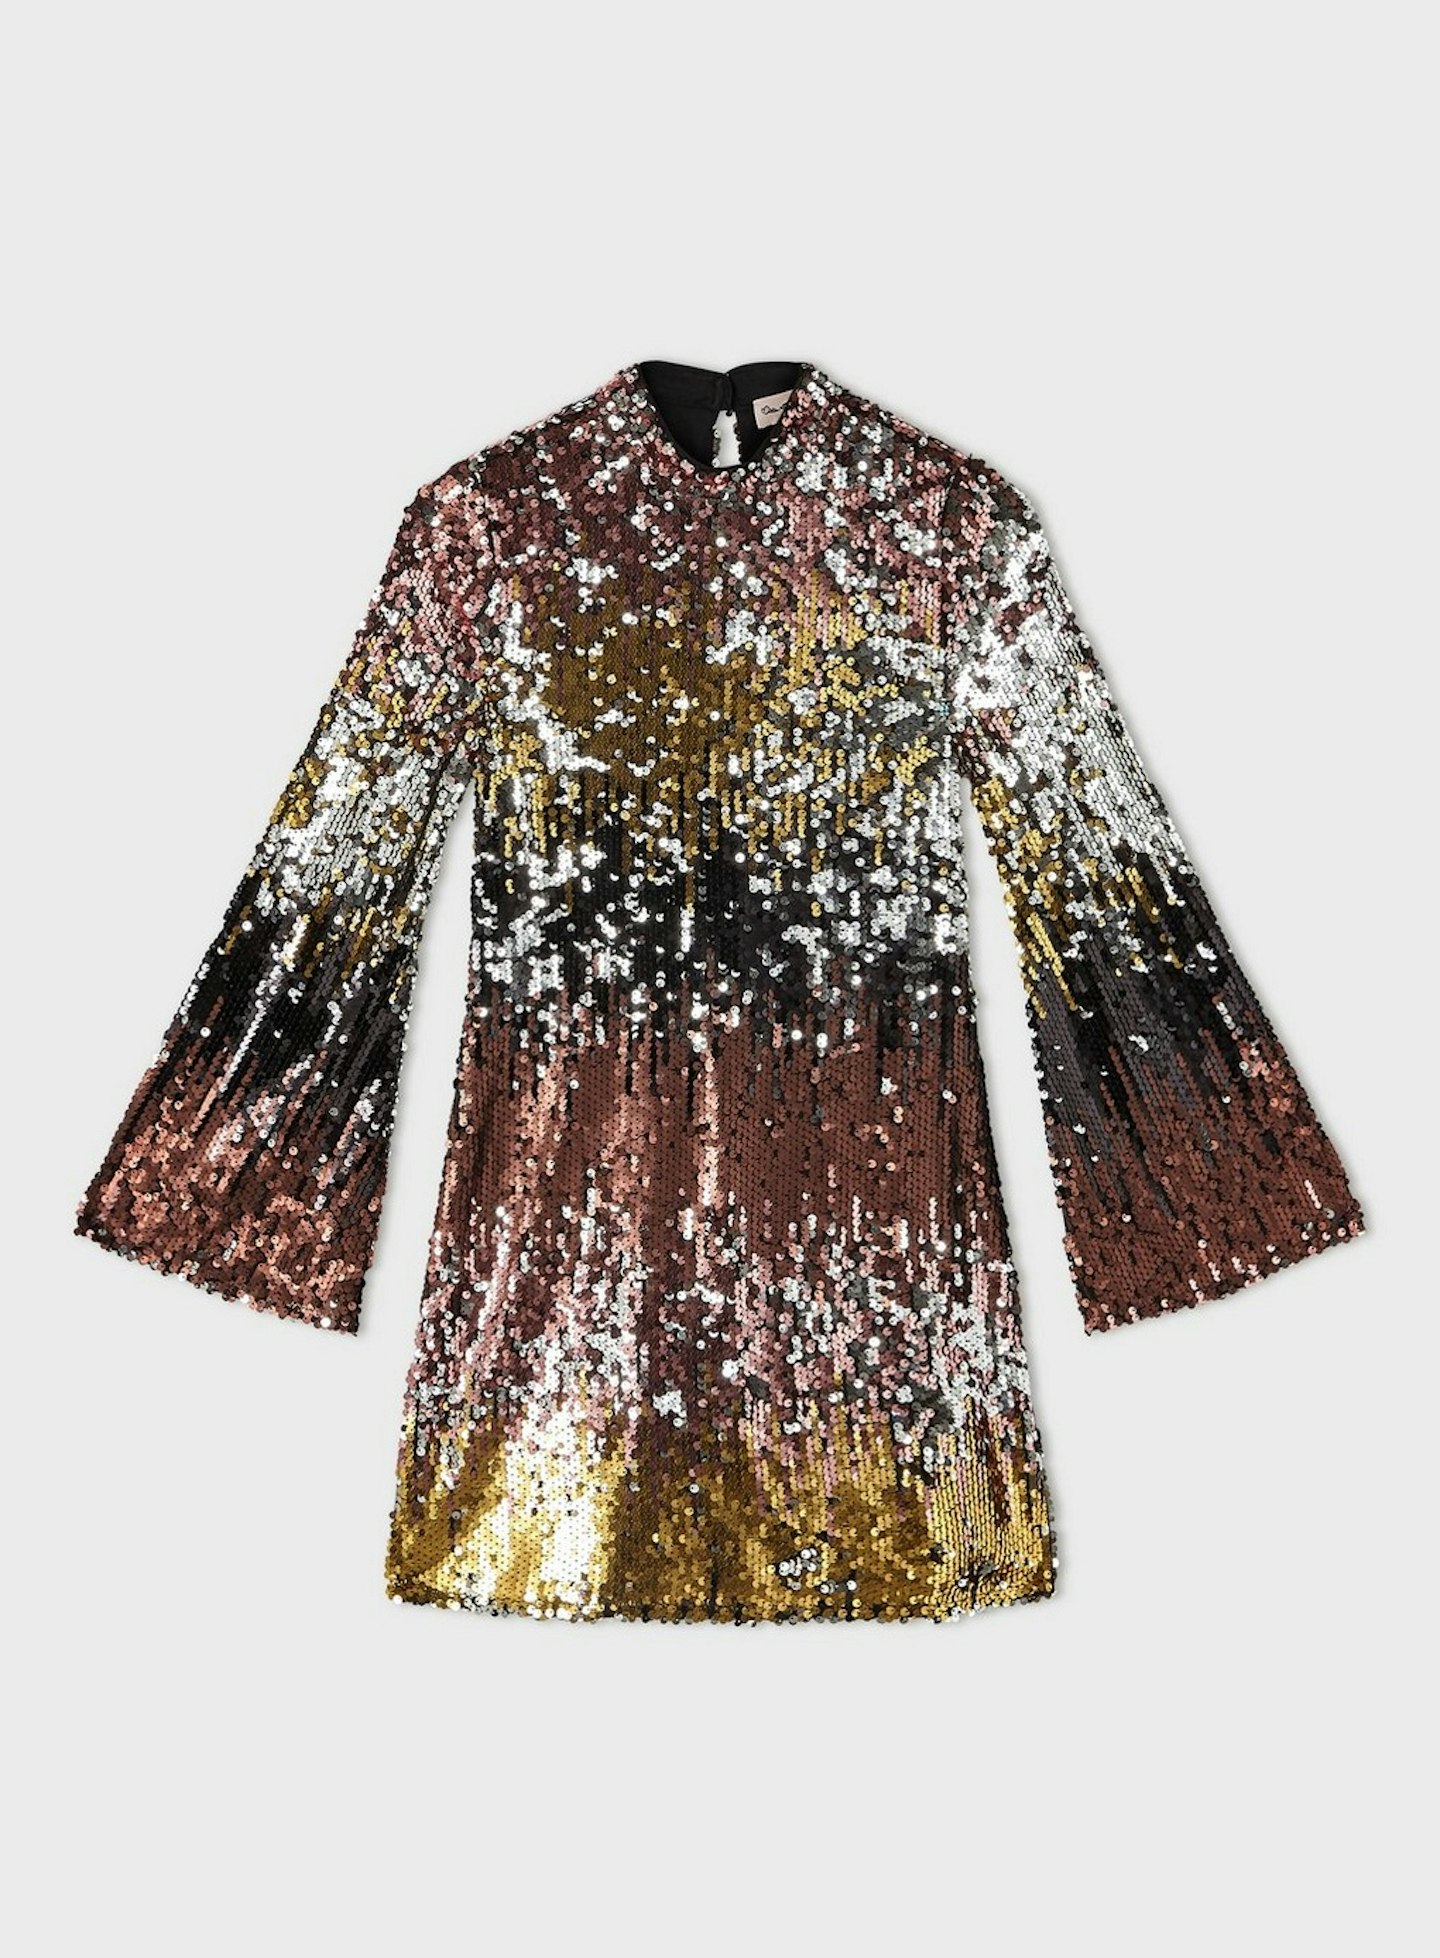 3 High Street Shops Appear To Be Selling Identical Sequin Dress